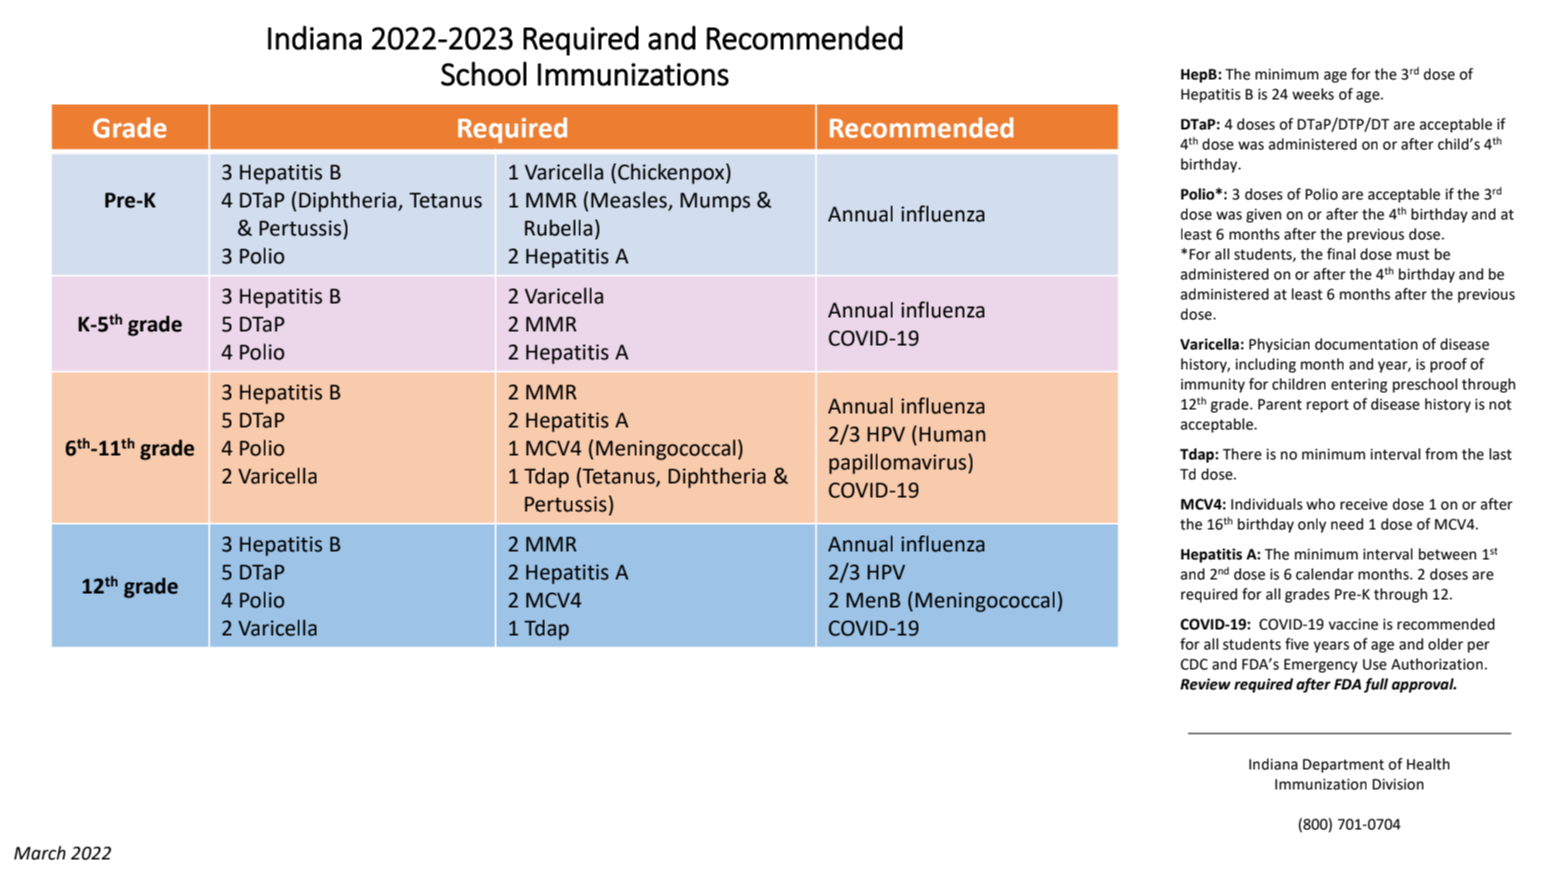 Indiana 2022-2023 Required and Recommended School Immunizations.